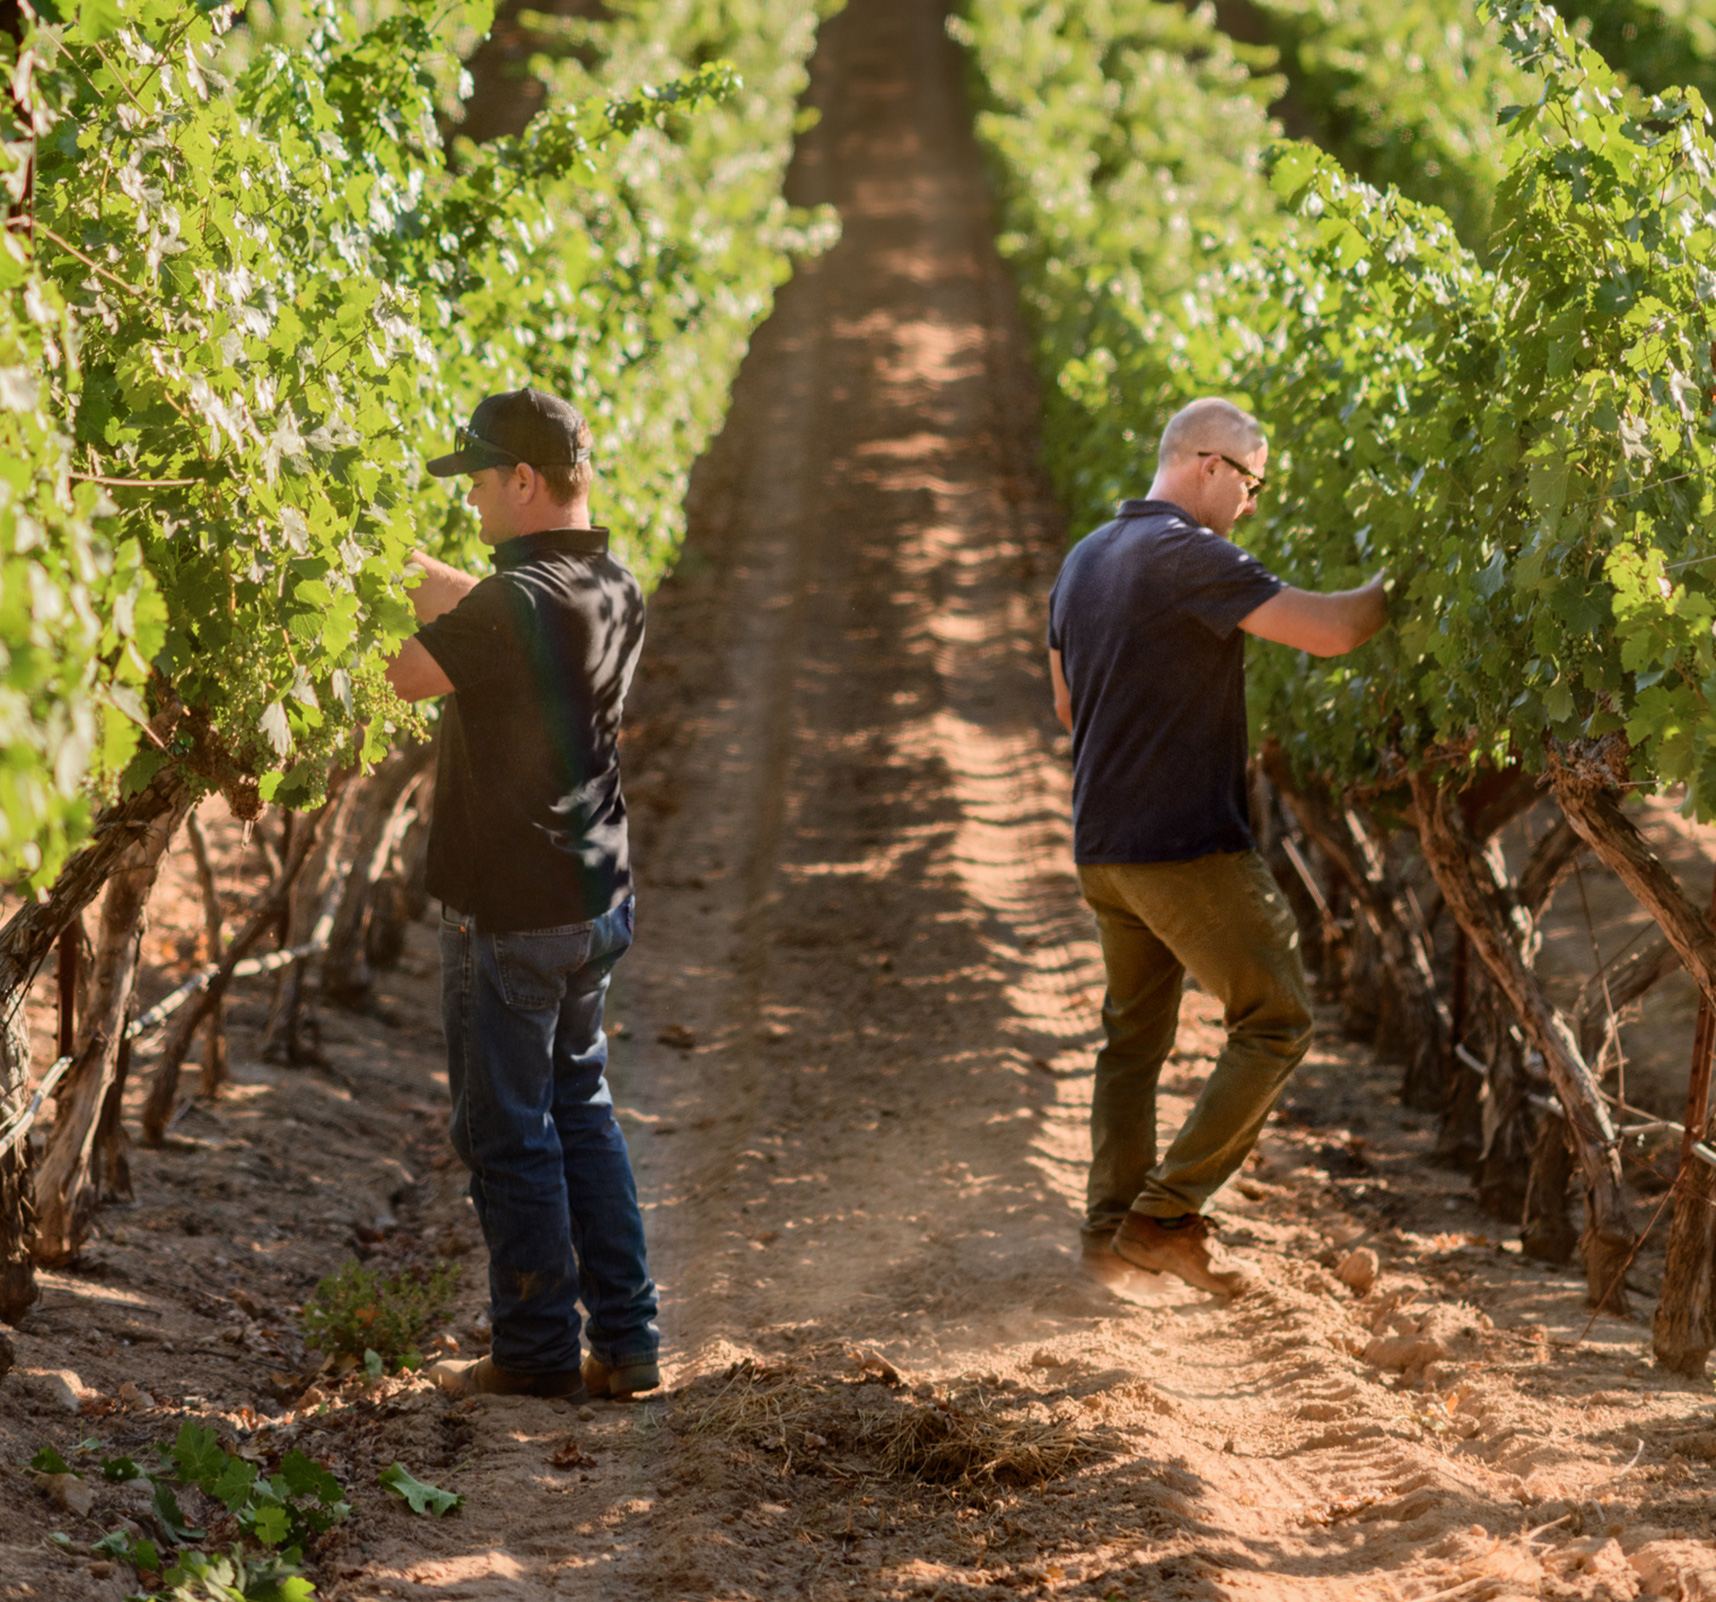 Thomas and Matt inspecting grapes in the vineyard